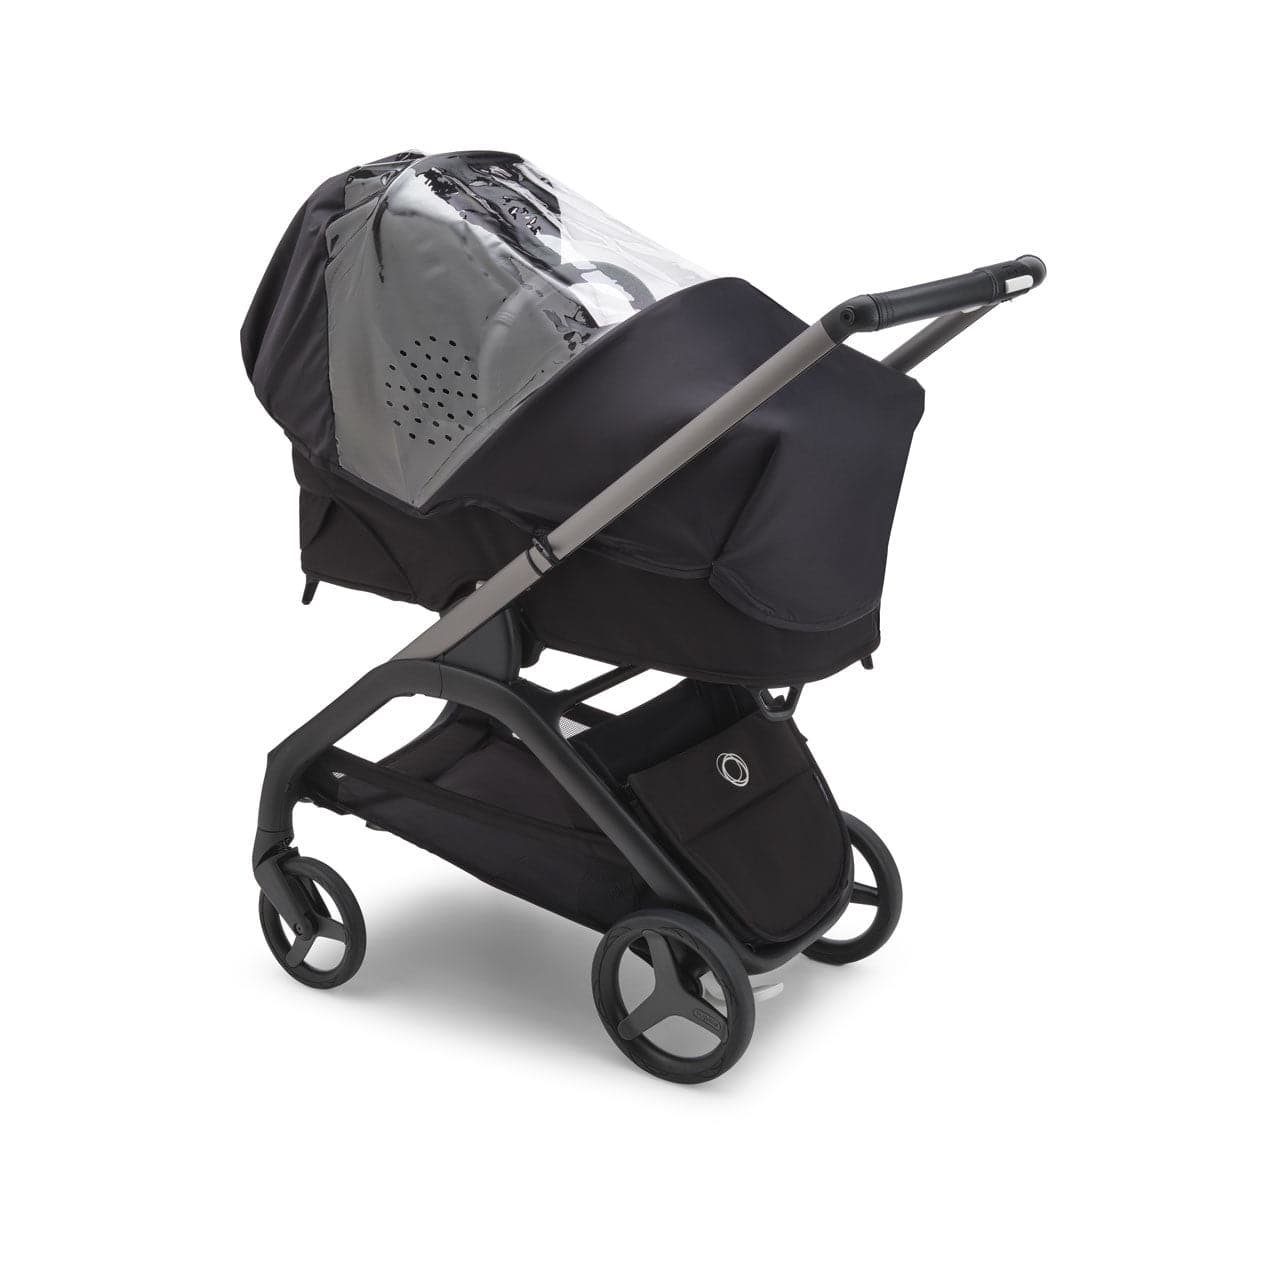 Bugaboo Dragonfly Raincover - For Your Little One